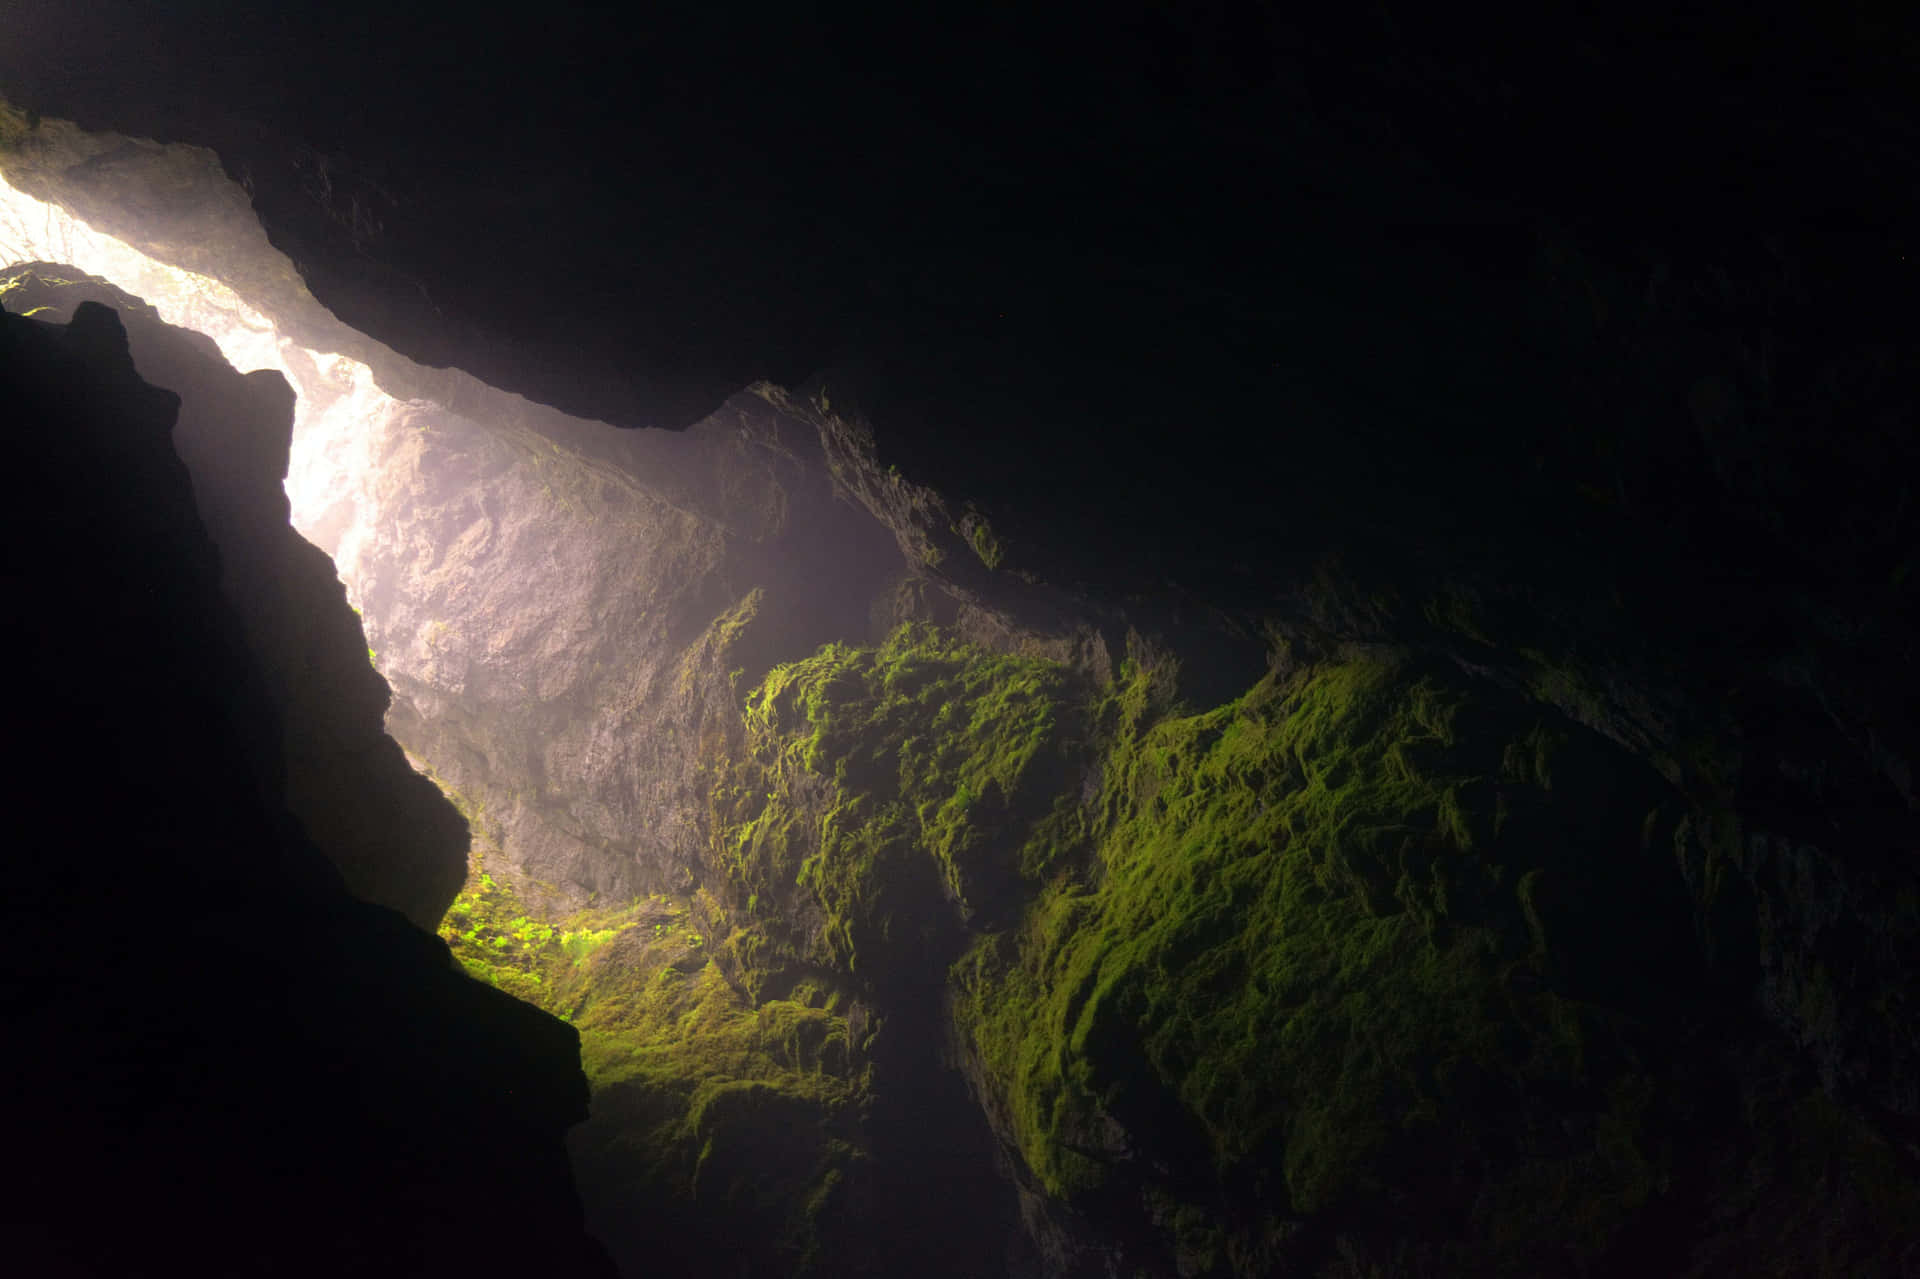 A view of a mysterious cave in the darkness